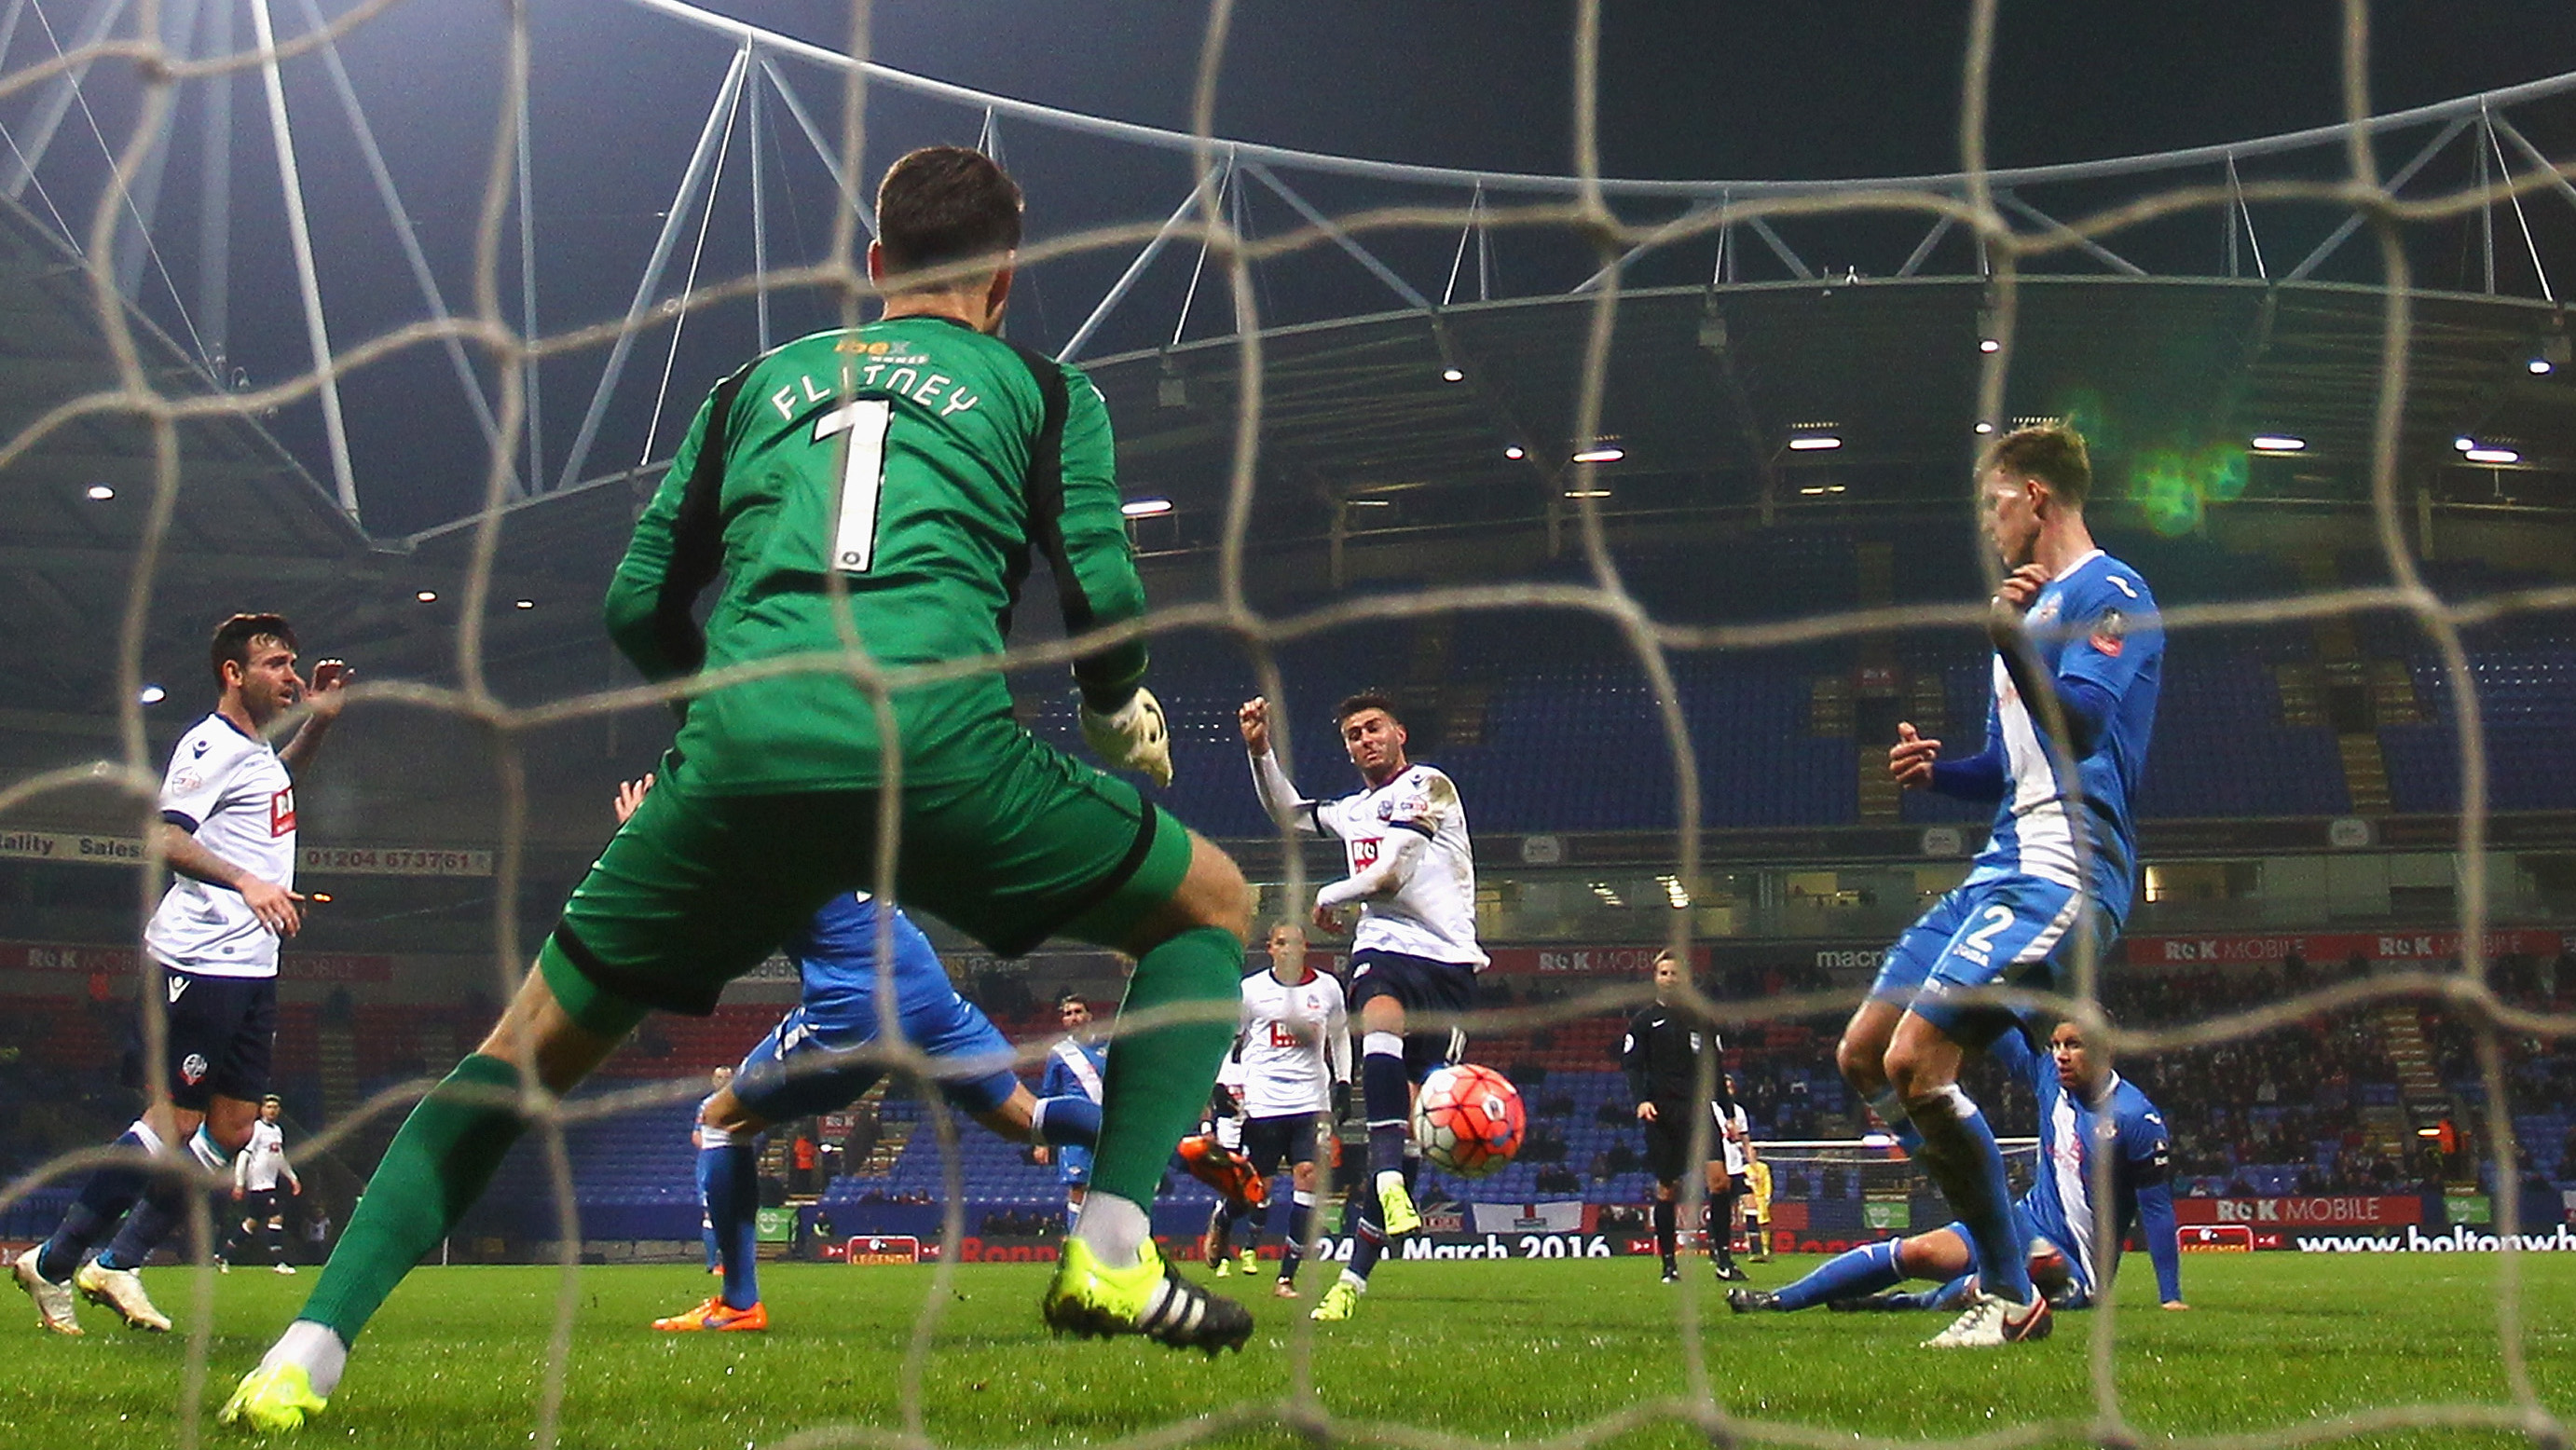 Gary Madine fires home for Bolton Wanderers